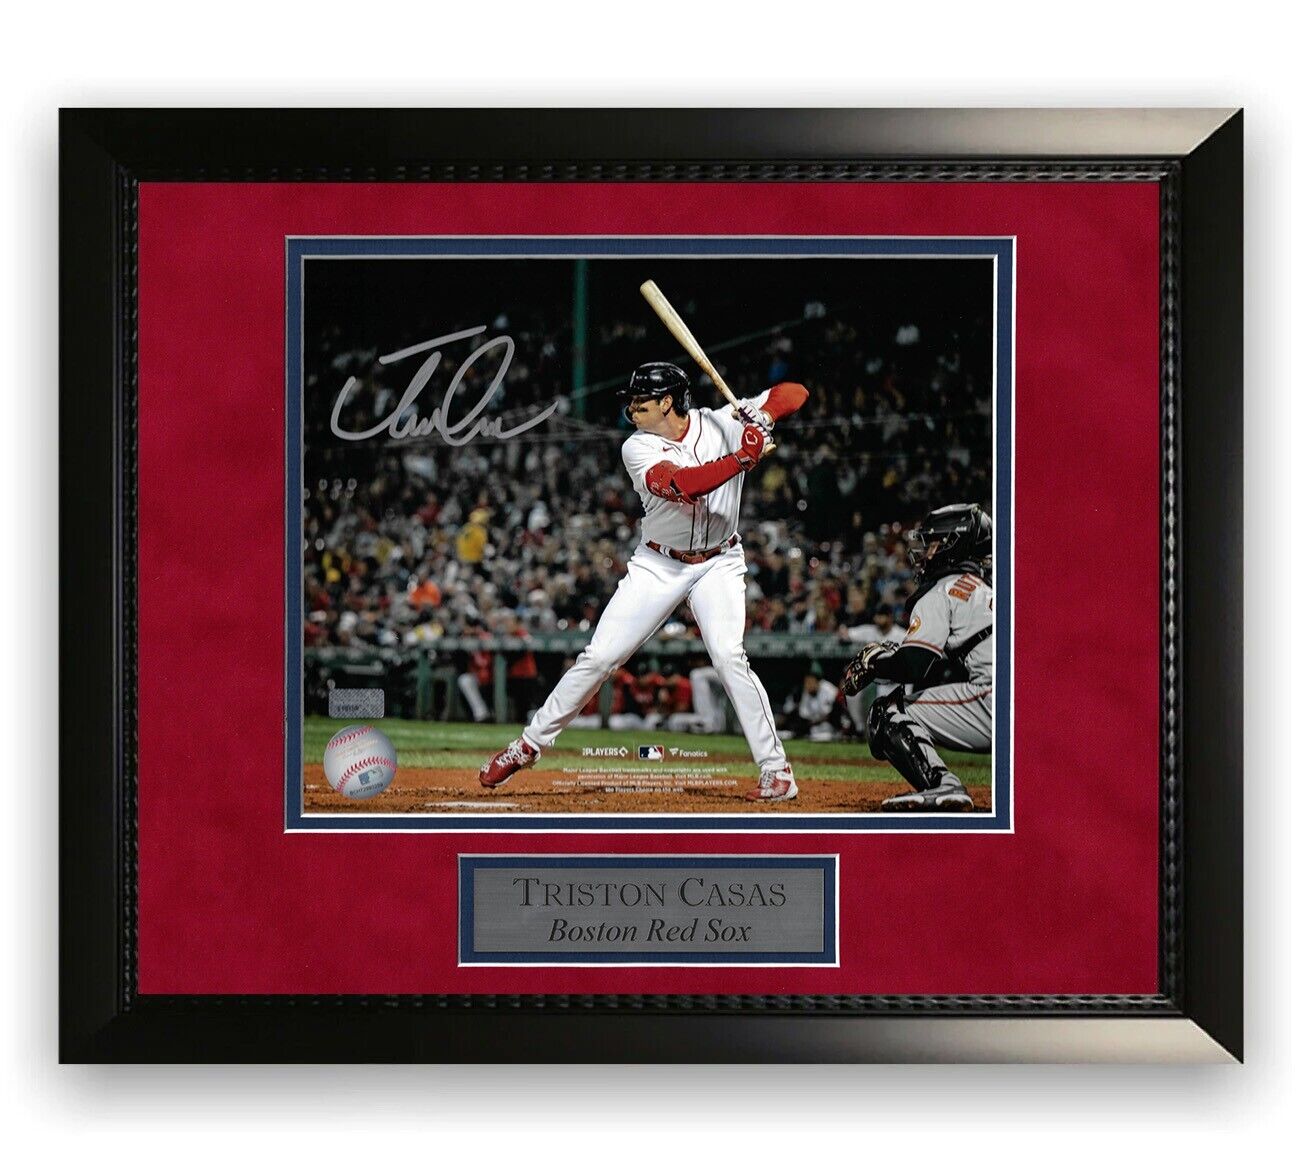 Triston Casas Boston Red Sox Autographed 8x10 Photo Framed to 11x14 NEP